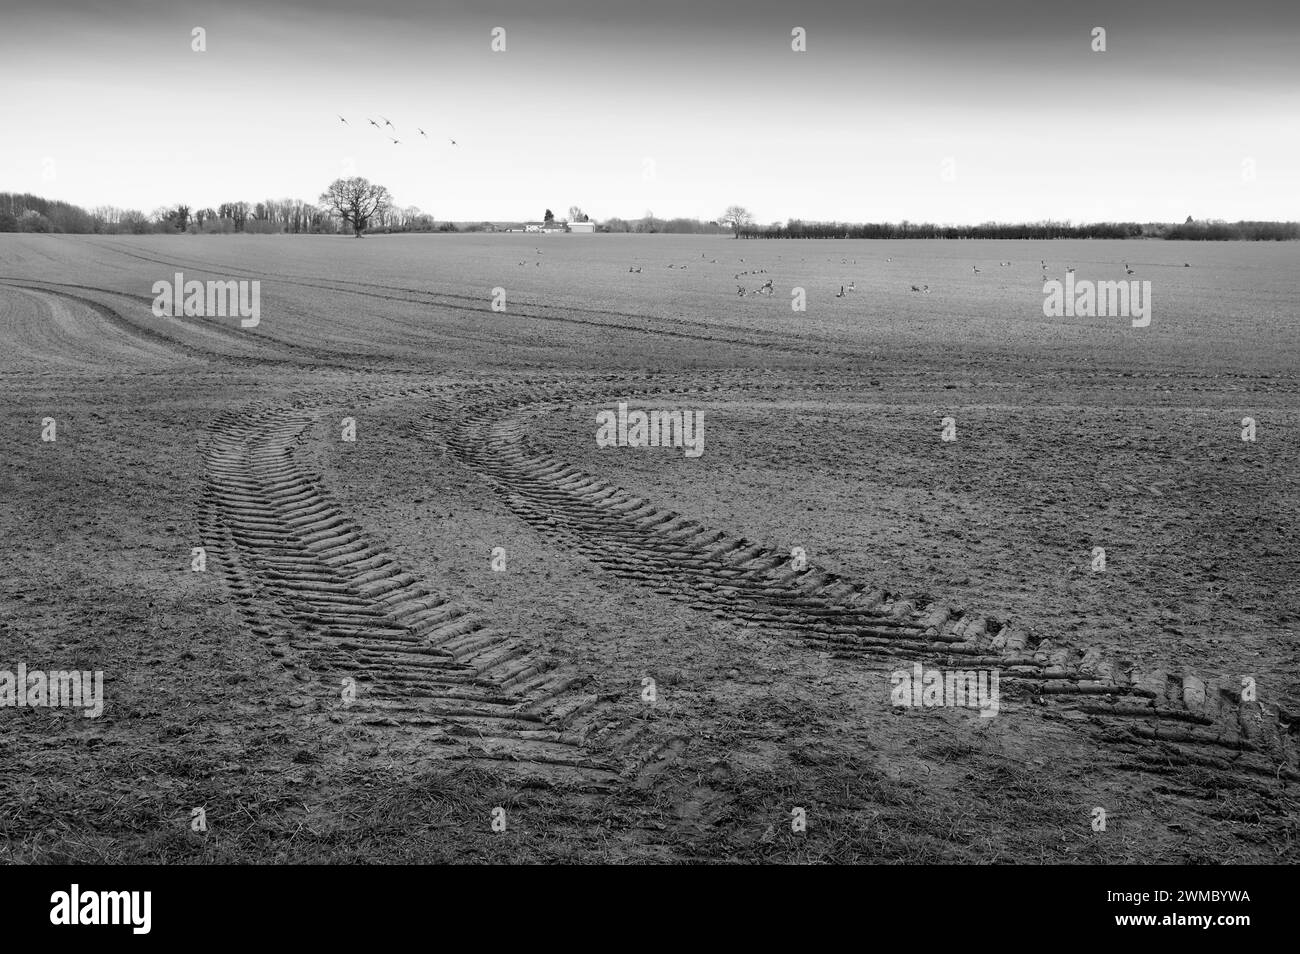 View across agricultural farmland with tractor tracks and flock of geese in sky and on ground feeding on a peaceful morning in rural Beverley, UK. Stock Photo